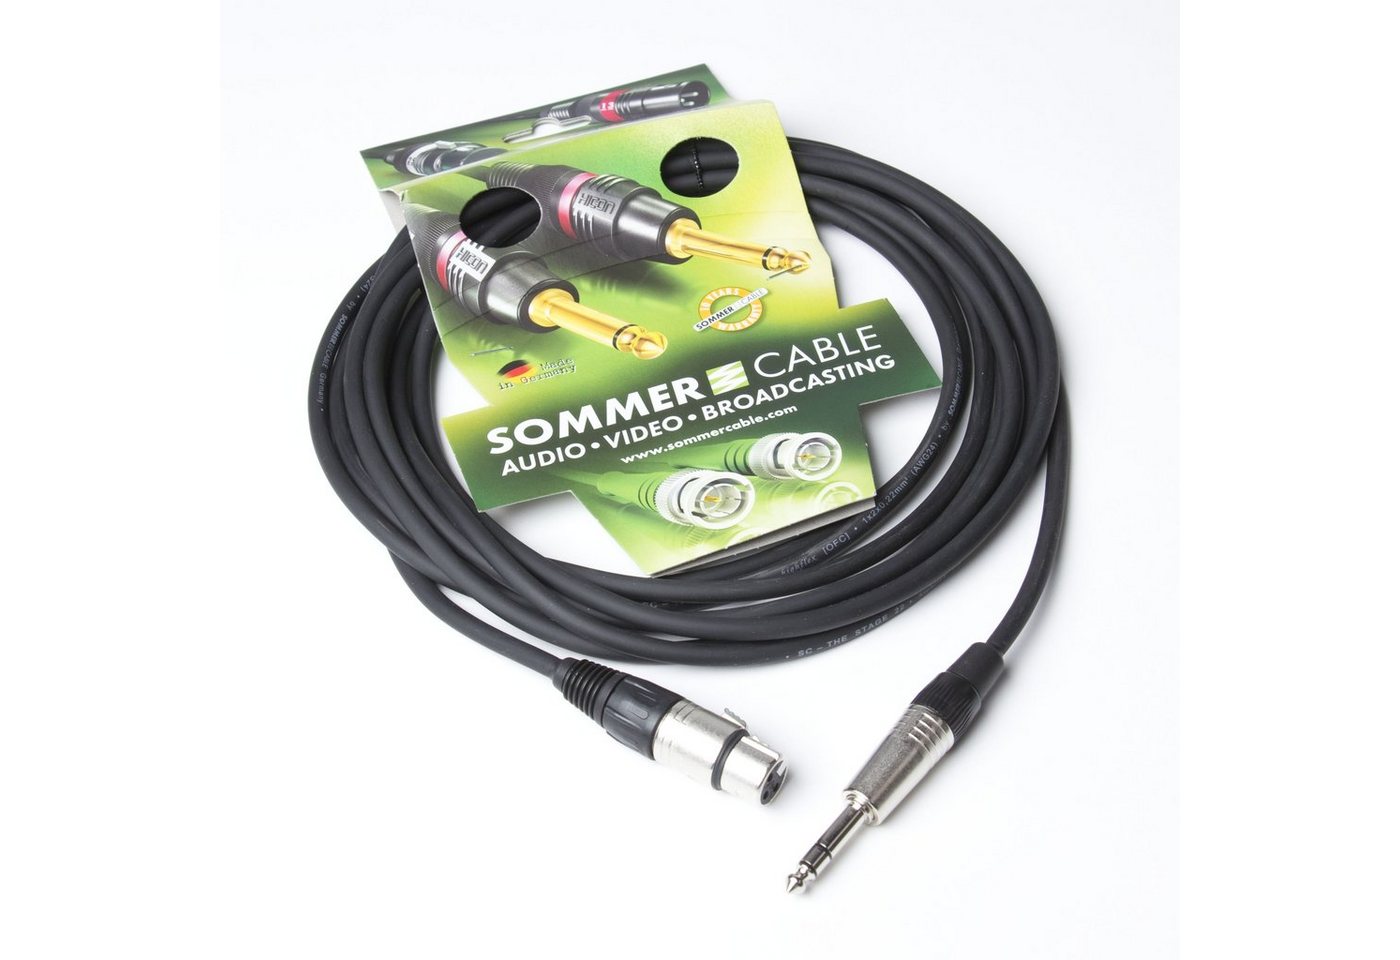 Sommer Cable Audio-Kabel, SG05-1000-SW Stage 22 Mikrofonkabel 10 m - Mikrofonkabel von Sommer Cable